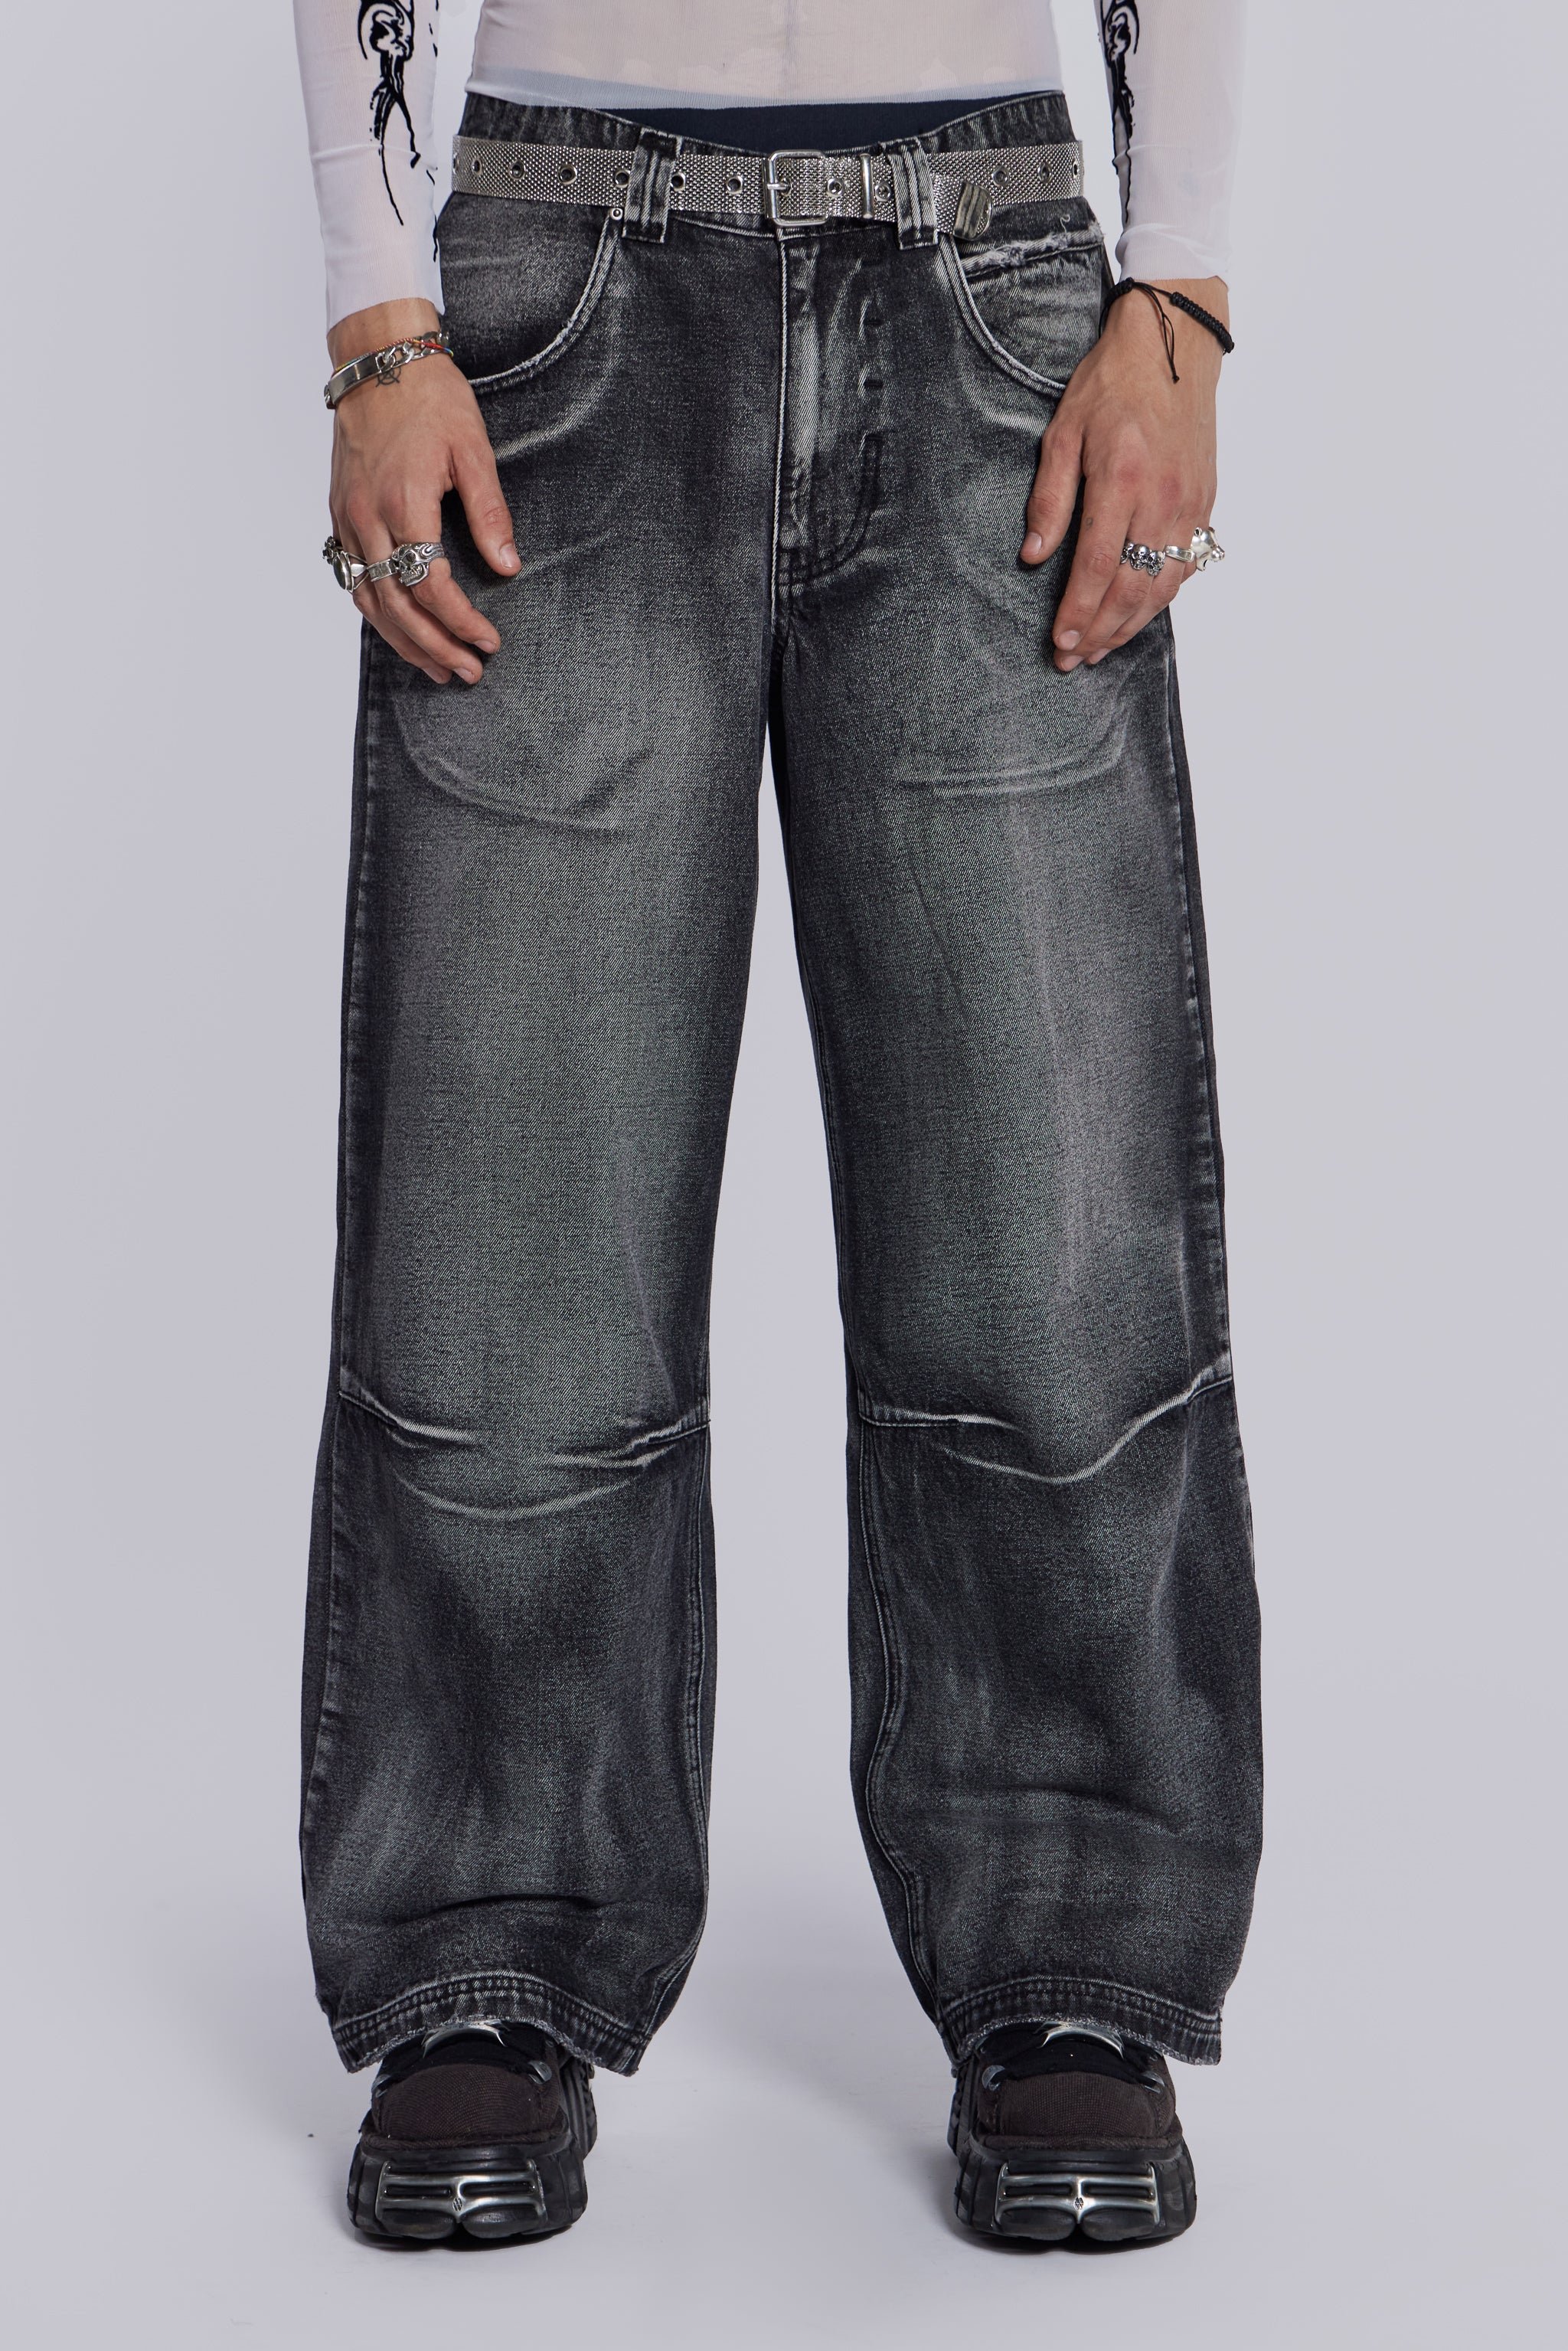 Black Wing Low Rise Colossus Jeans | Jaded London